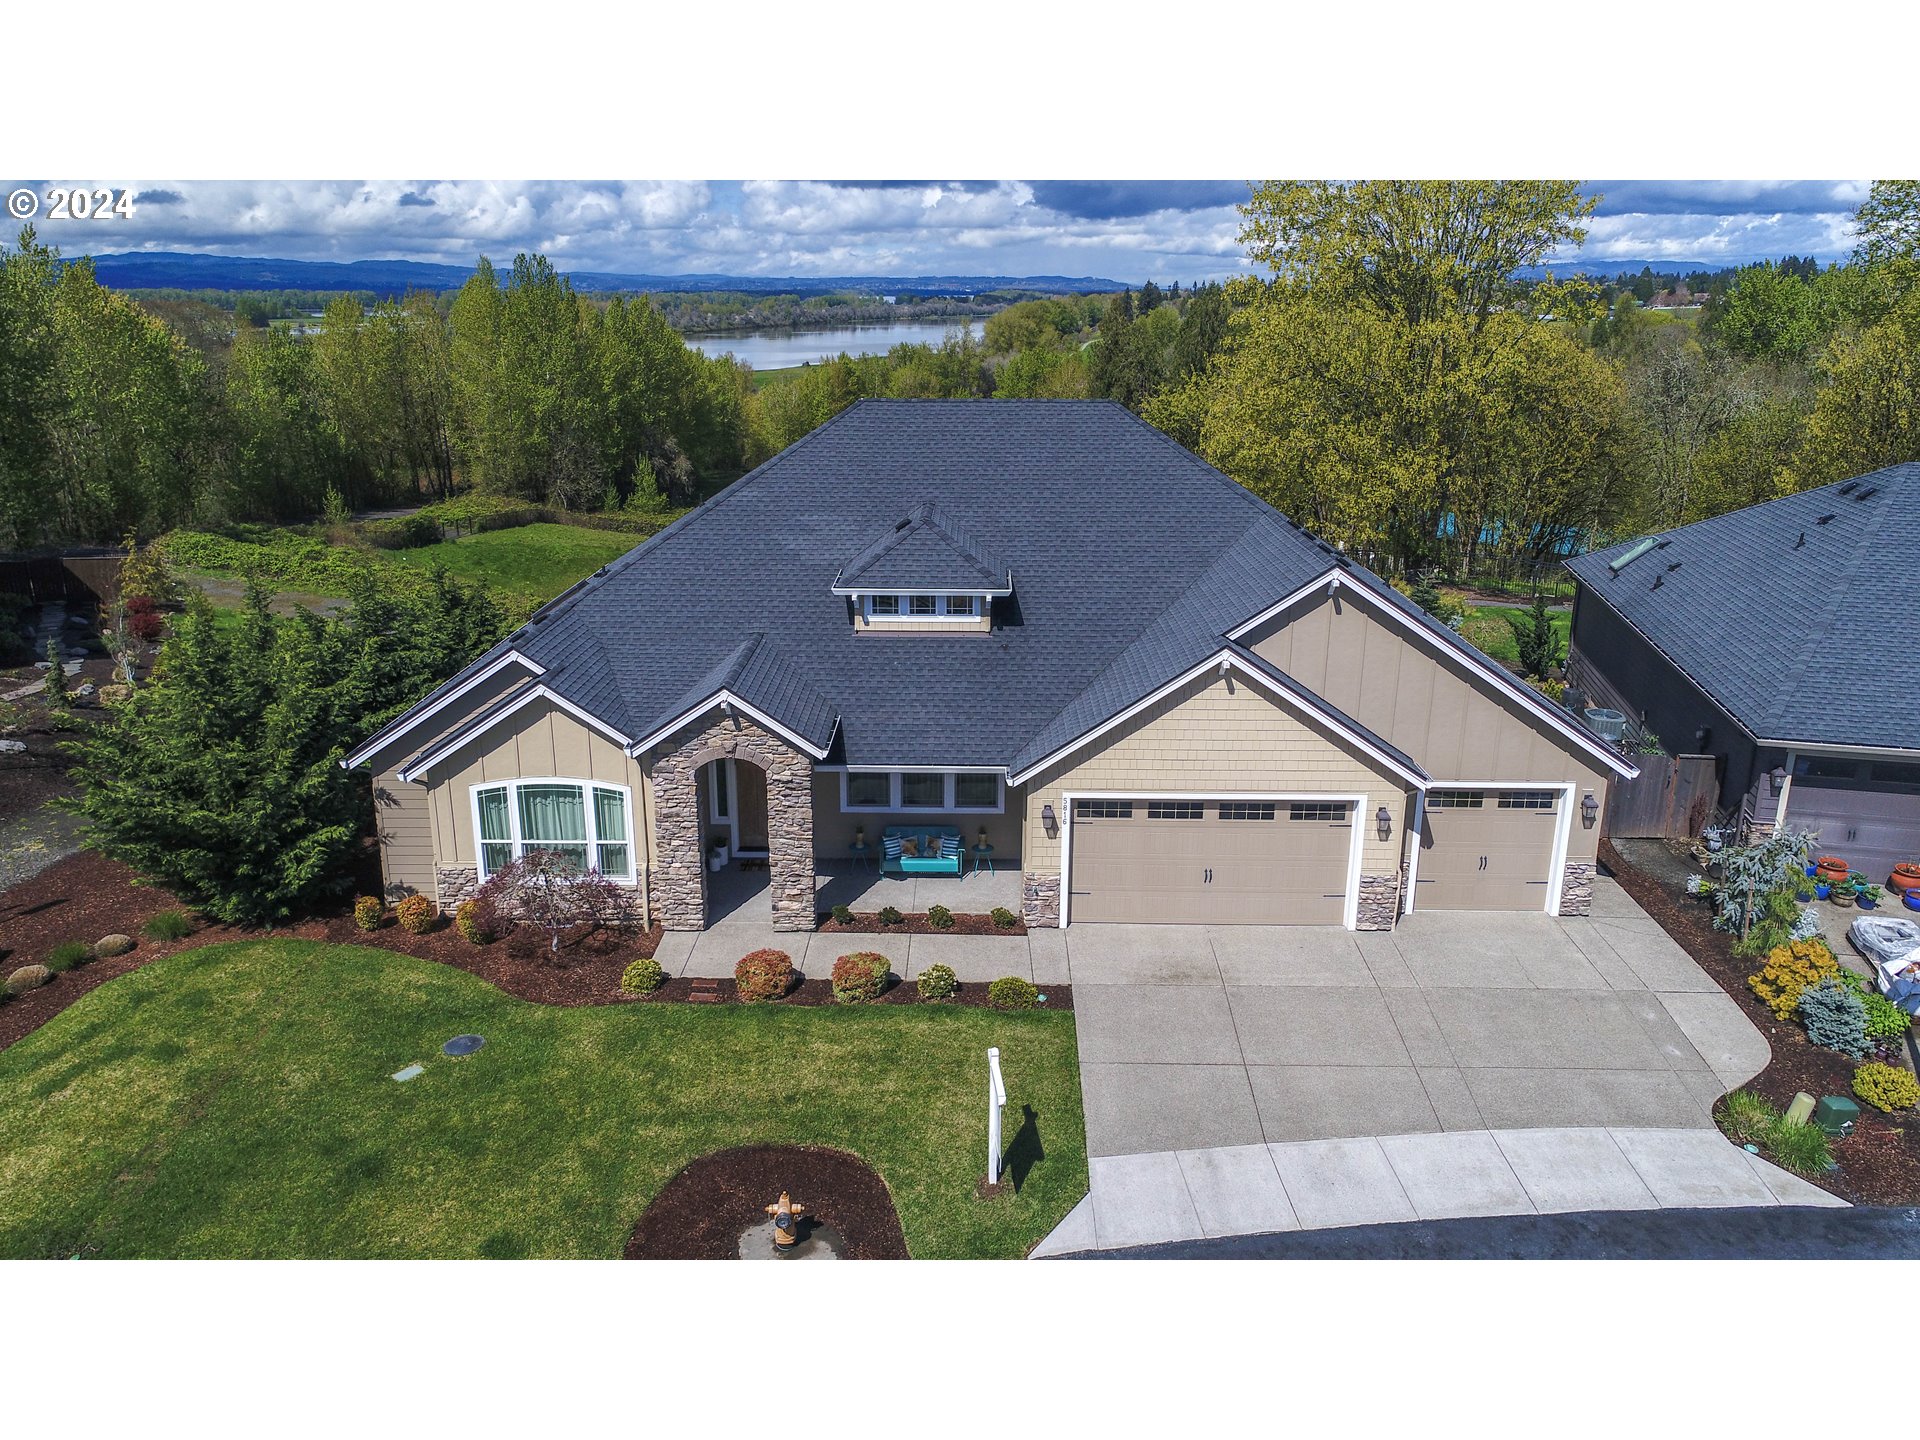 5816 NW 151st Dr, Vancouver, WA 98685